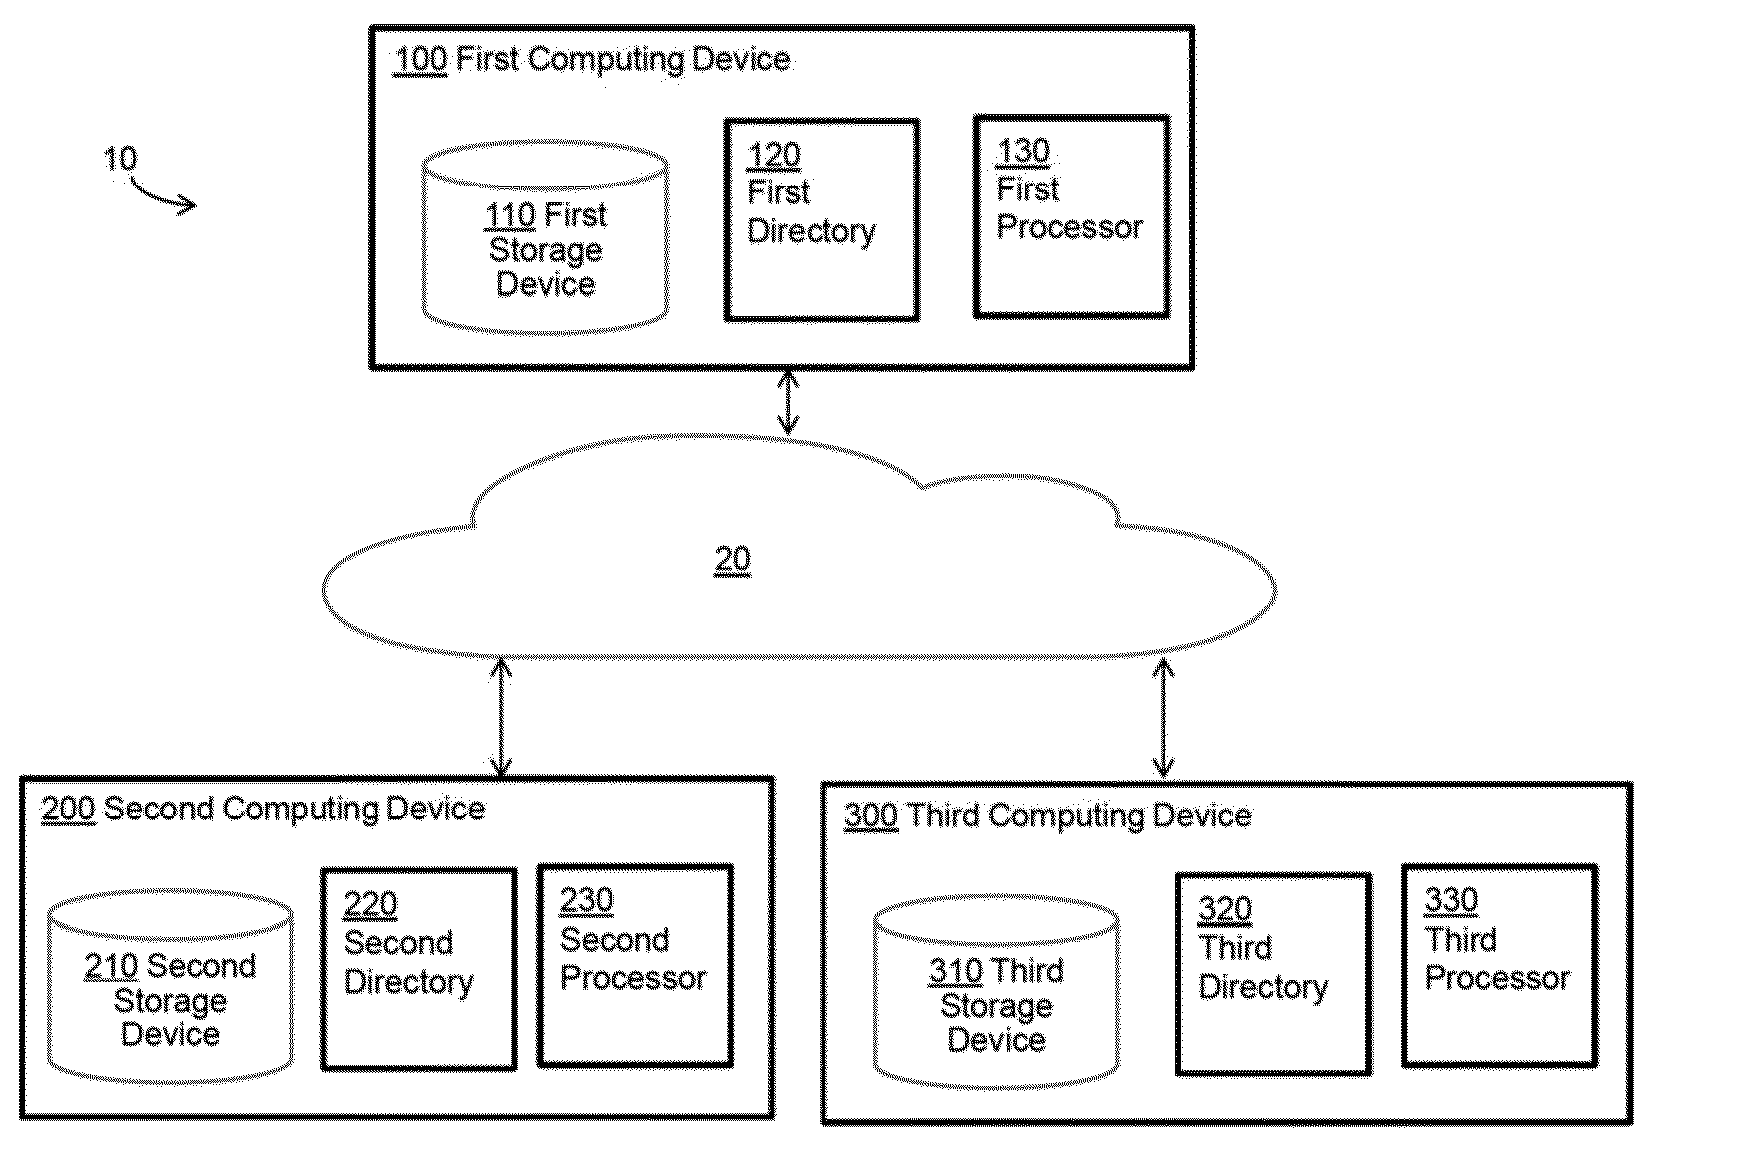 System and method for syncing local directories that enable file access across multiple devices